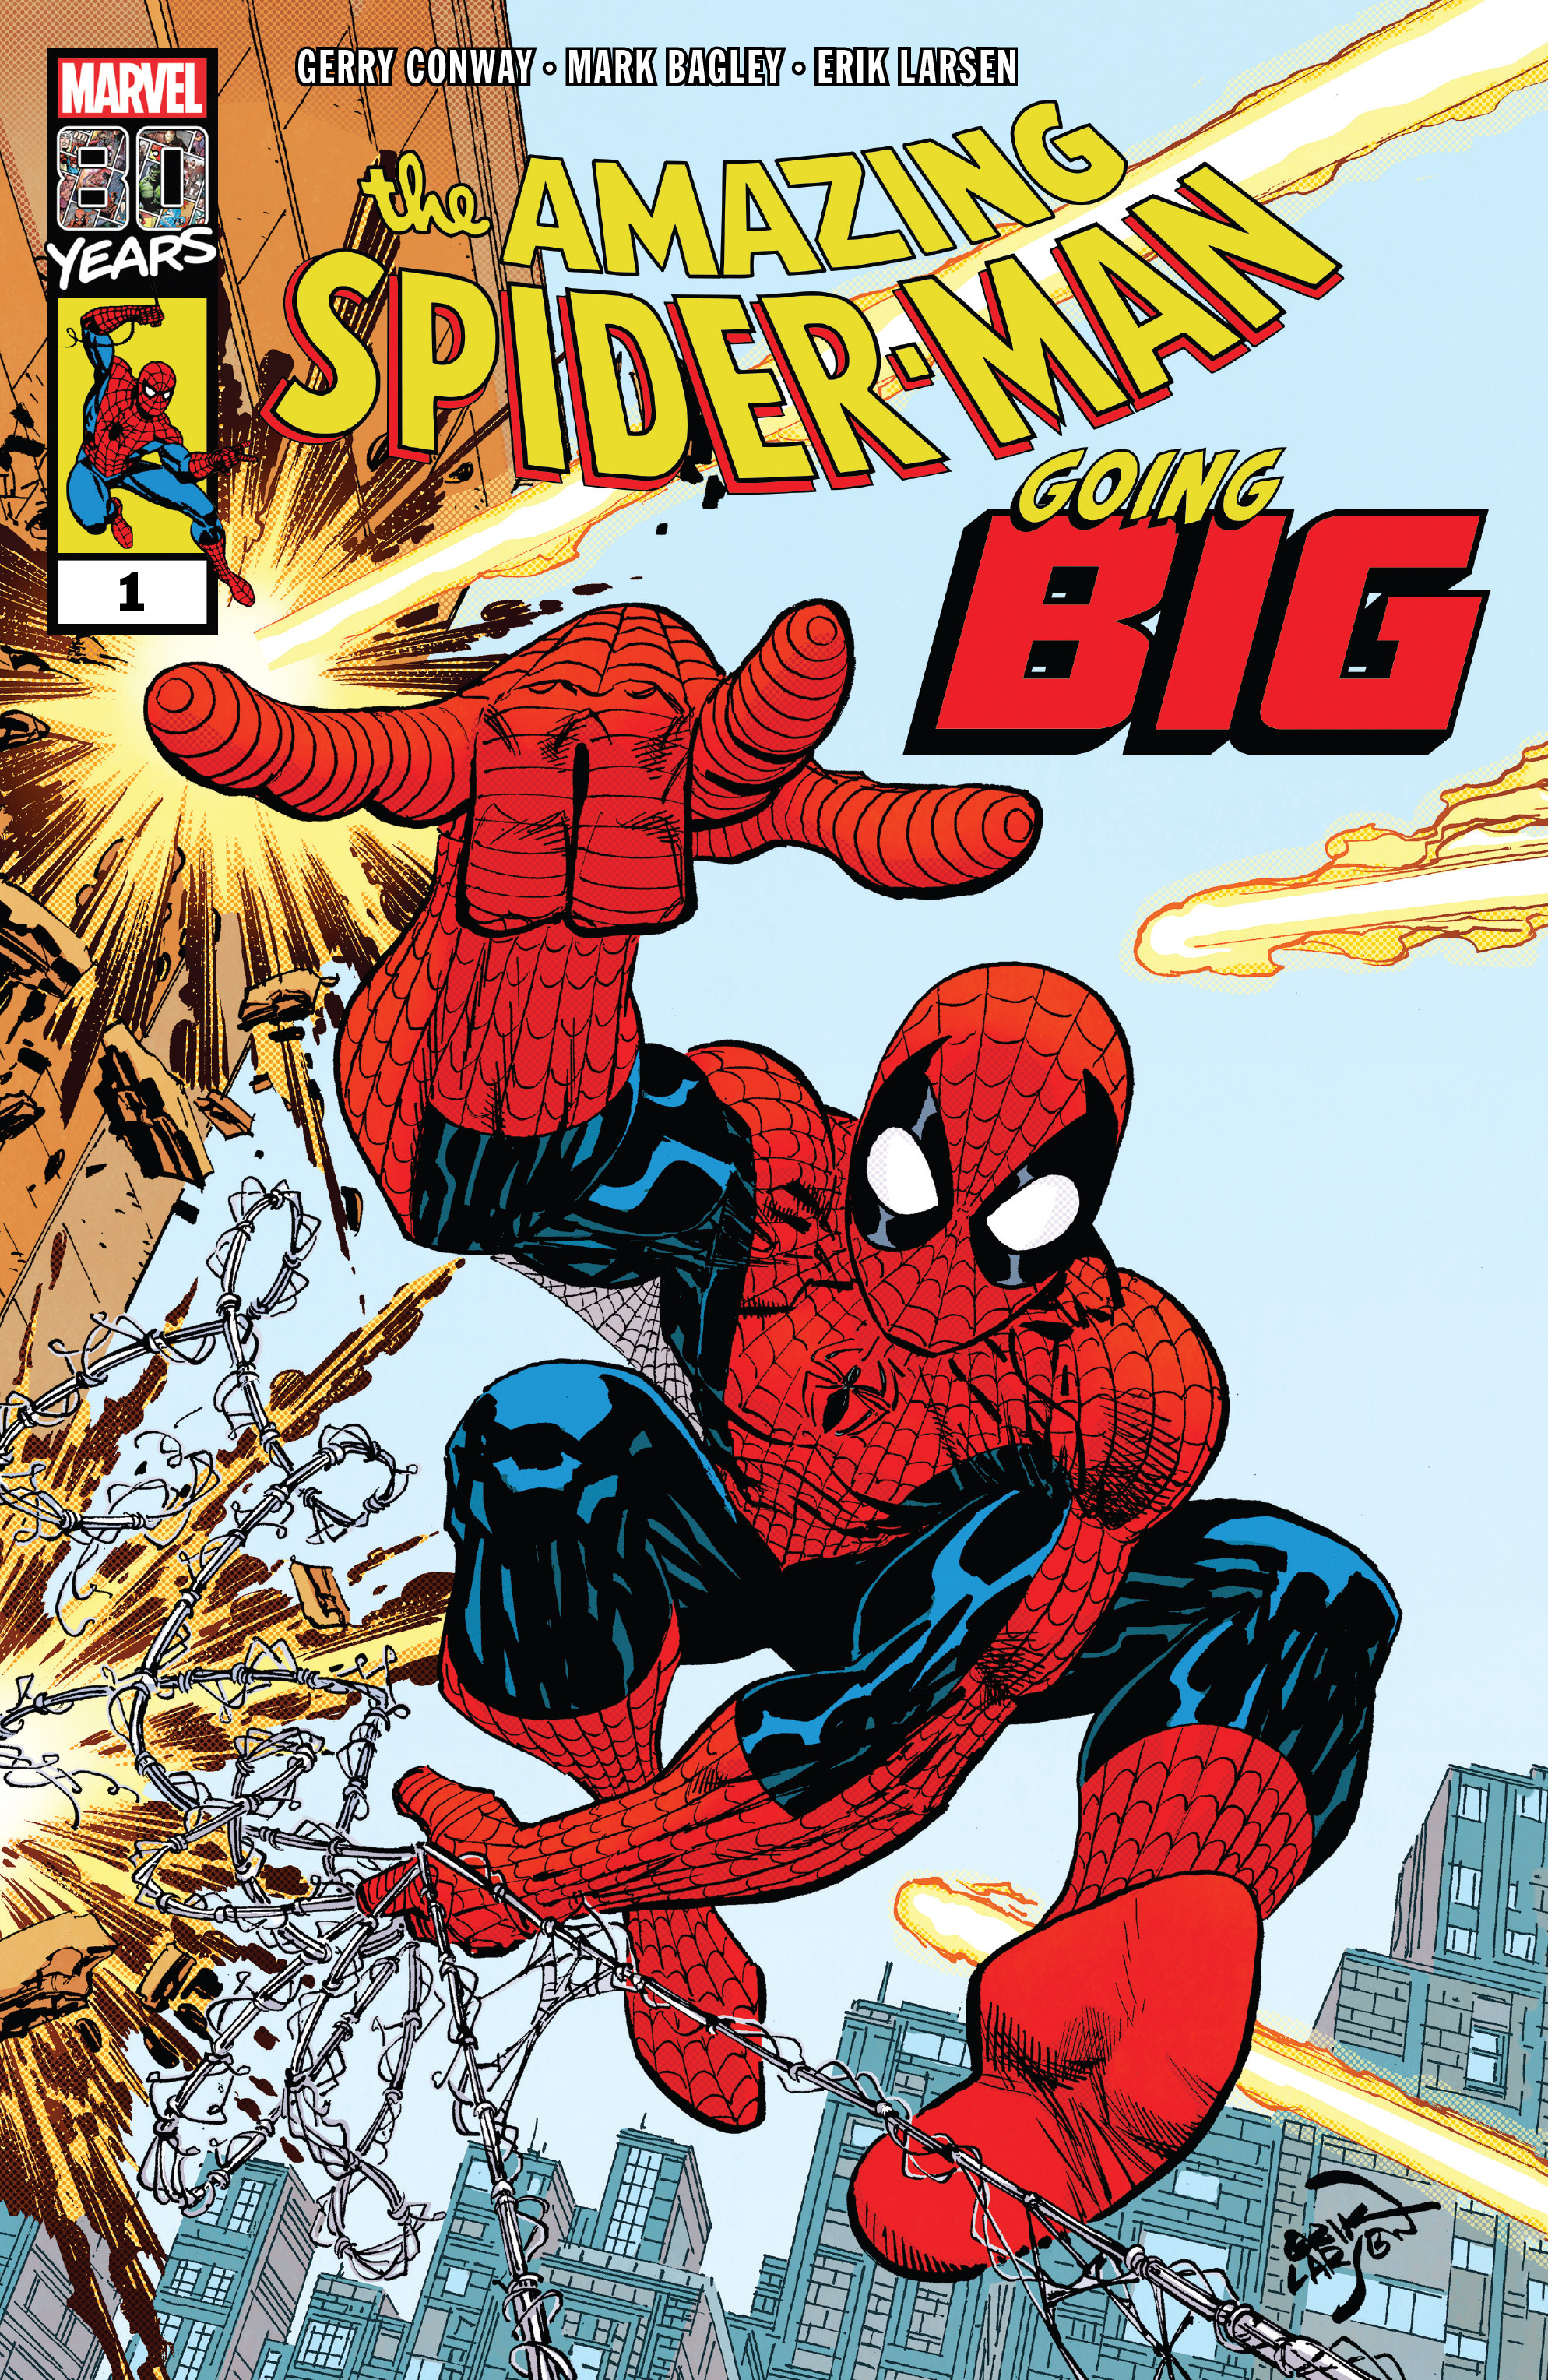 Read online Amazing Spider-Man: Going Big comic -  Issue # Full - 1